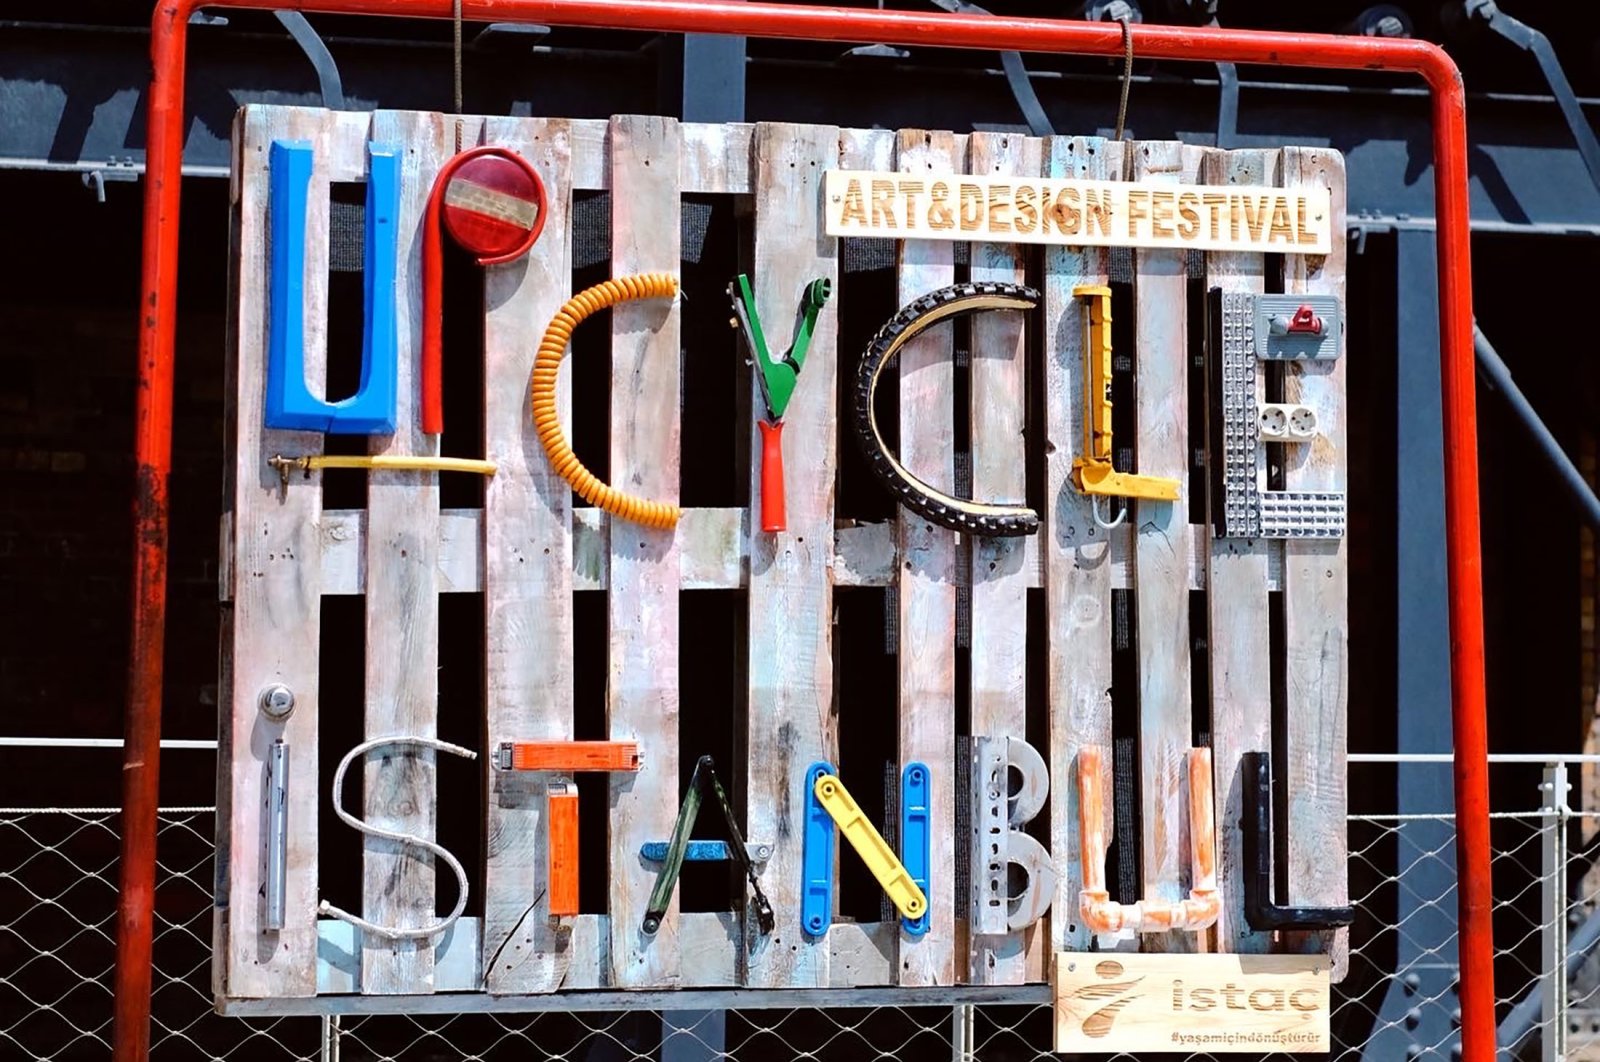 The Upcycle Istanbul sign can be seen at Museum Gazhane, in Istanbul, Turkey, June 4, 2022. (Photo courtesy of Upcycle Istanbul)